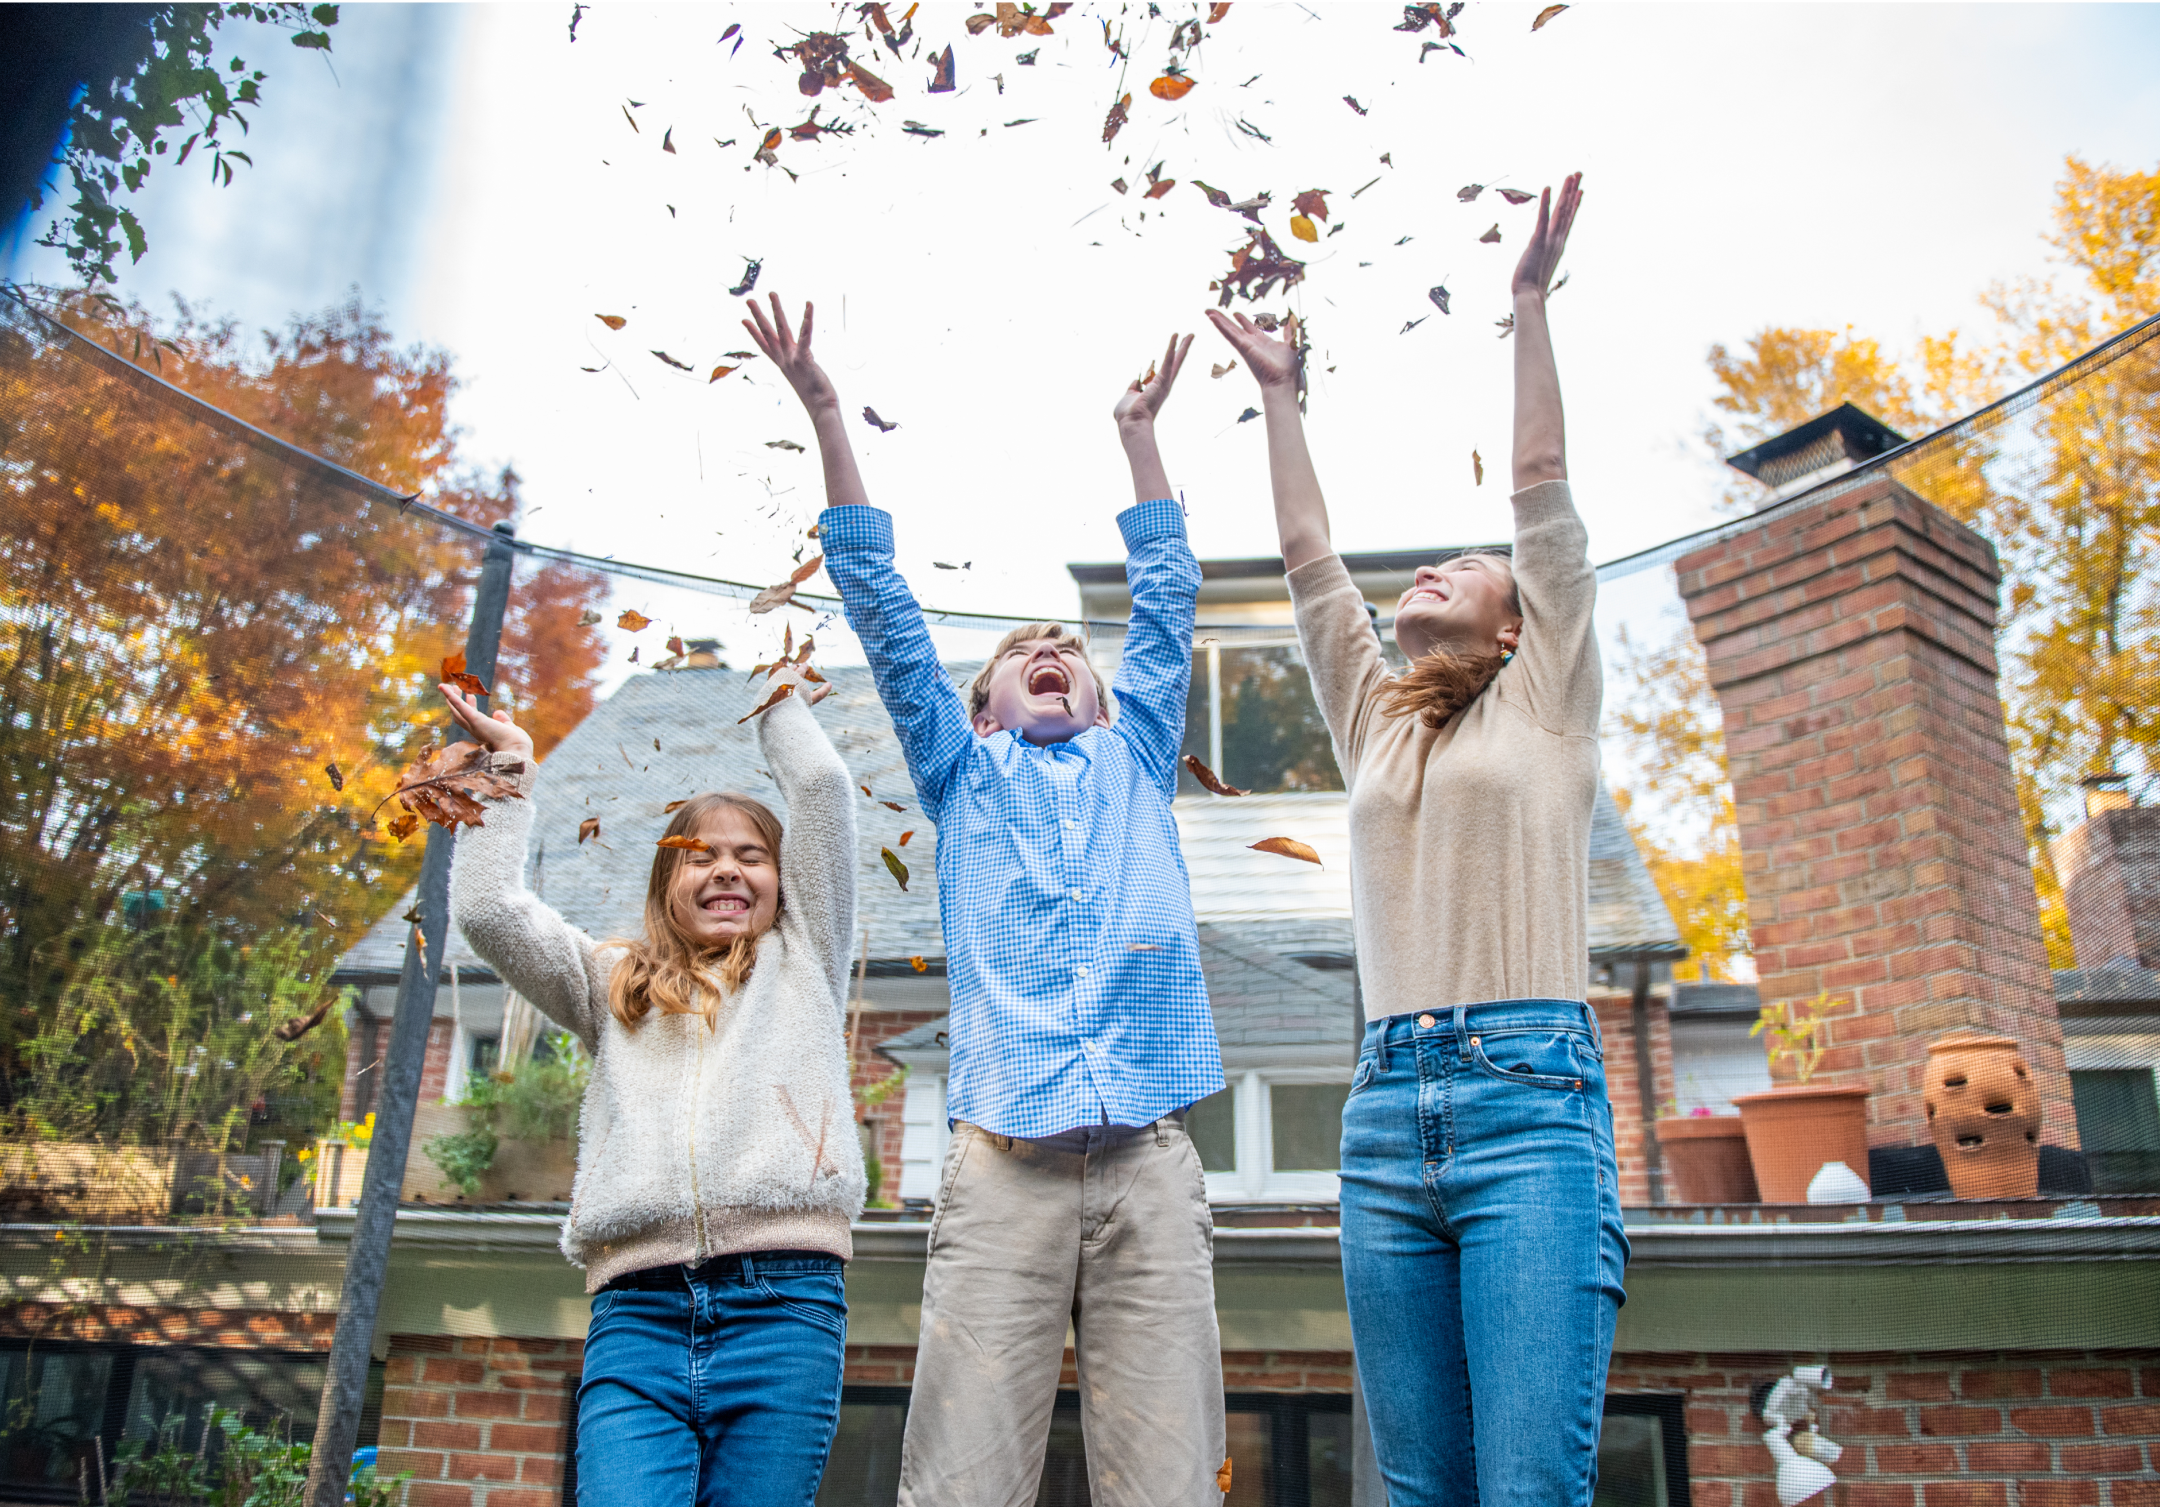 Three children outside throwing leaves into the air